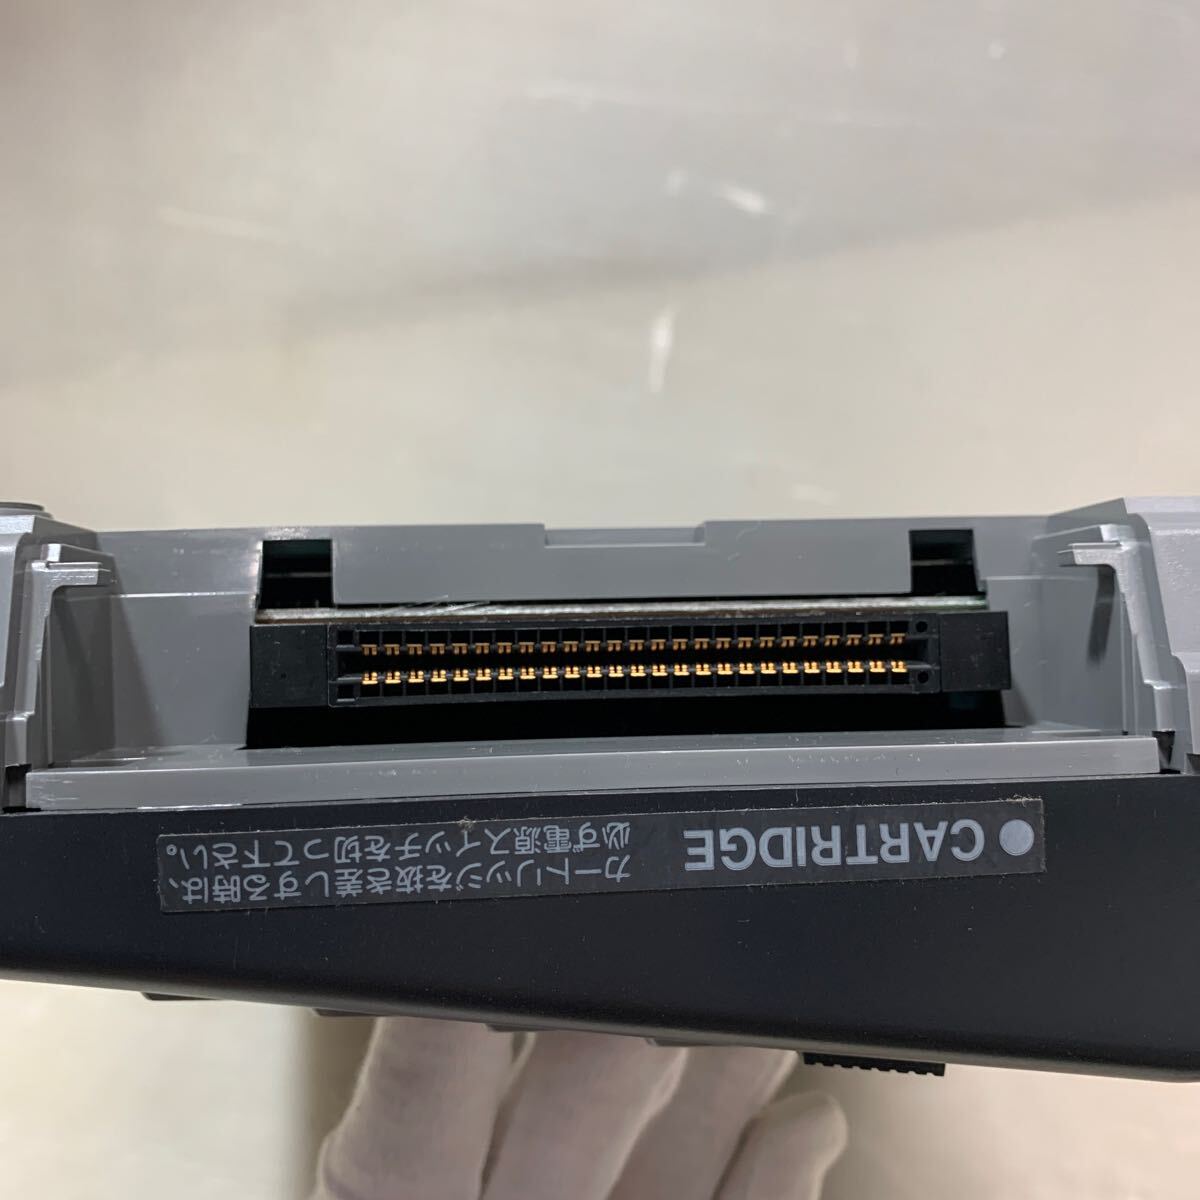 MSX Canon V-20 64K operation not yet verification therefore junk 